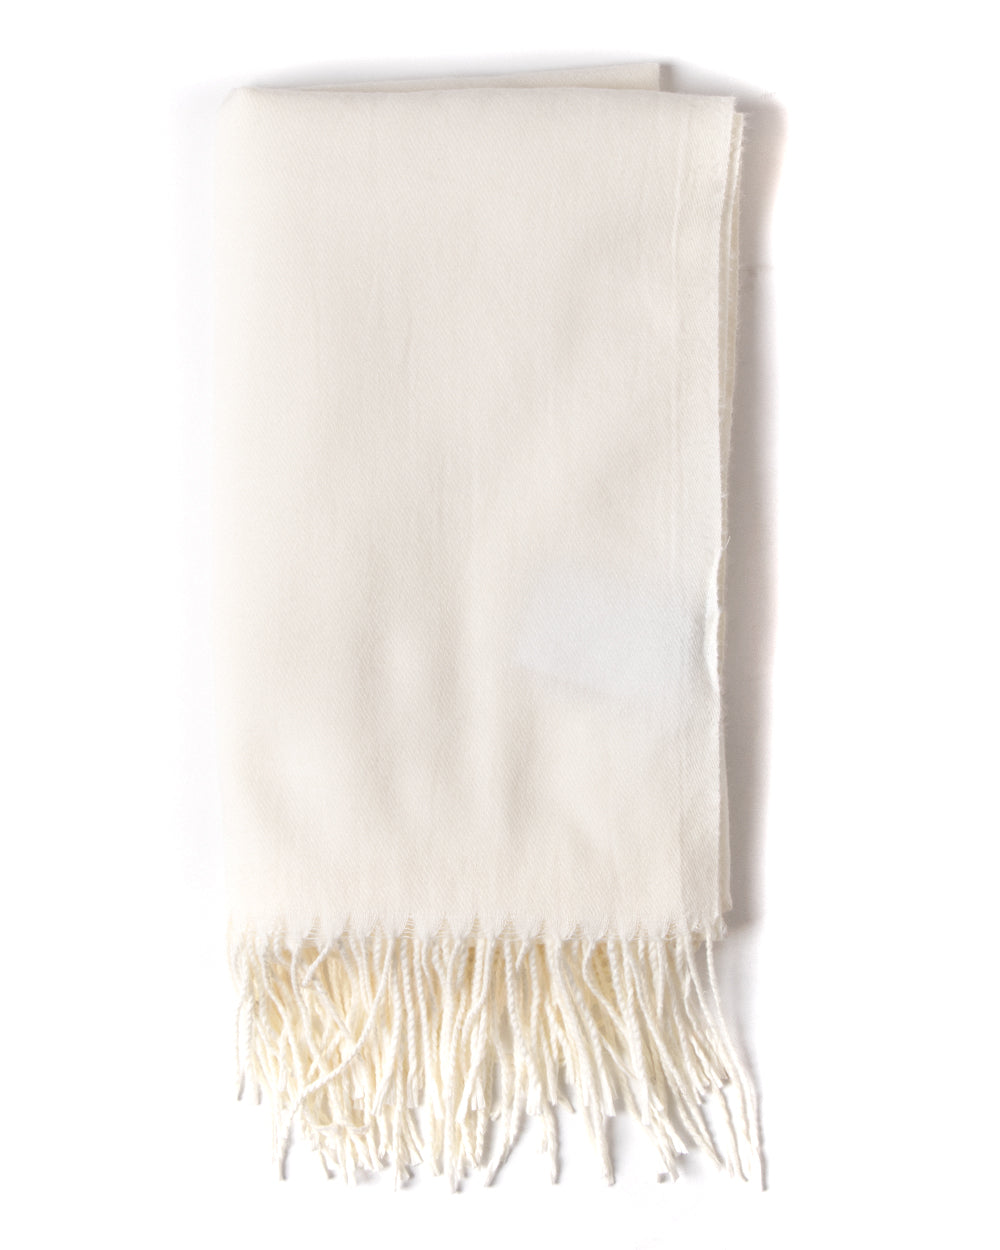 Unisex Scarf for Men and Women Solid Color Cream Casual Soft Basic Fringes GIOSAL-SH1023A